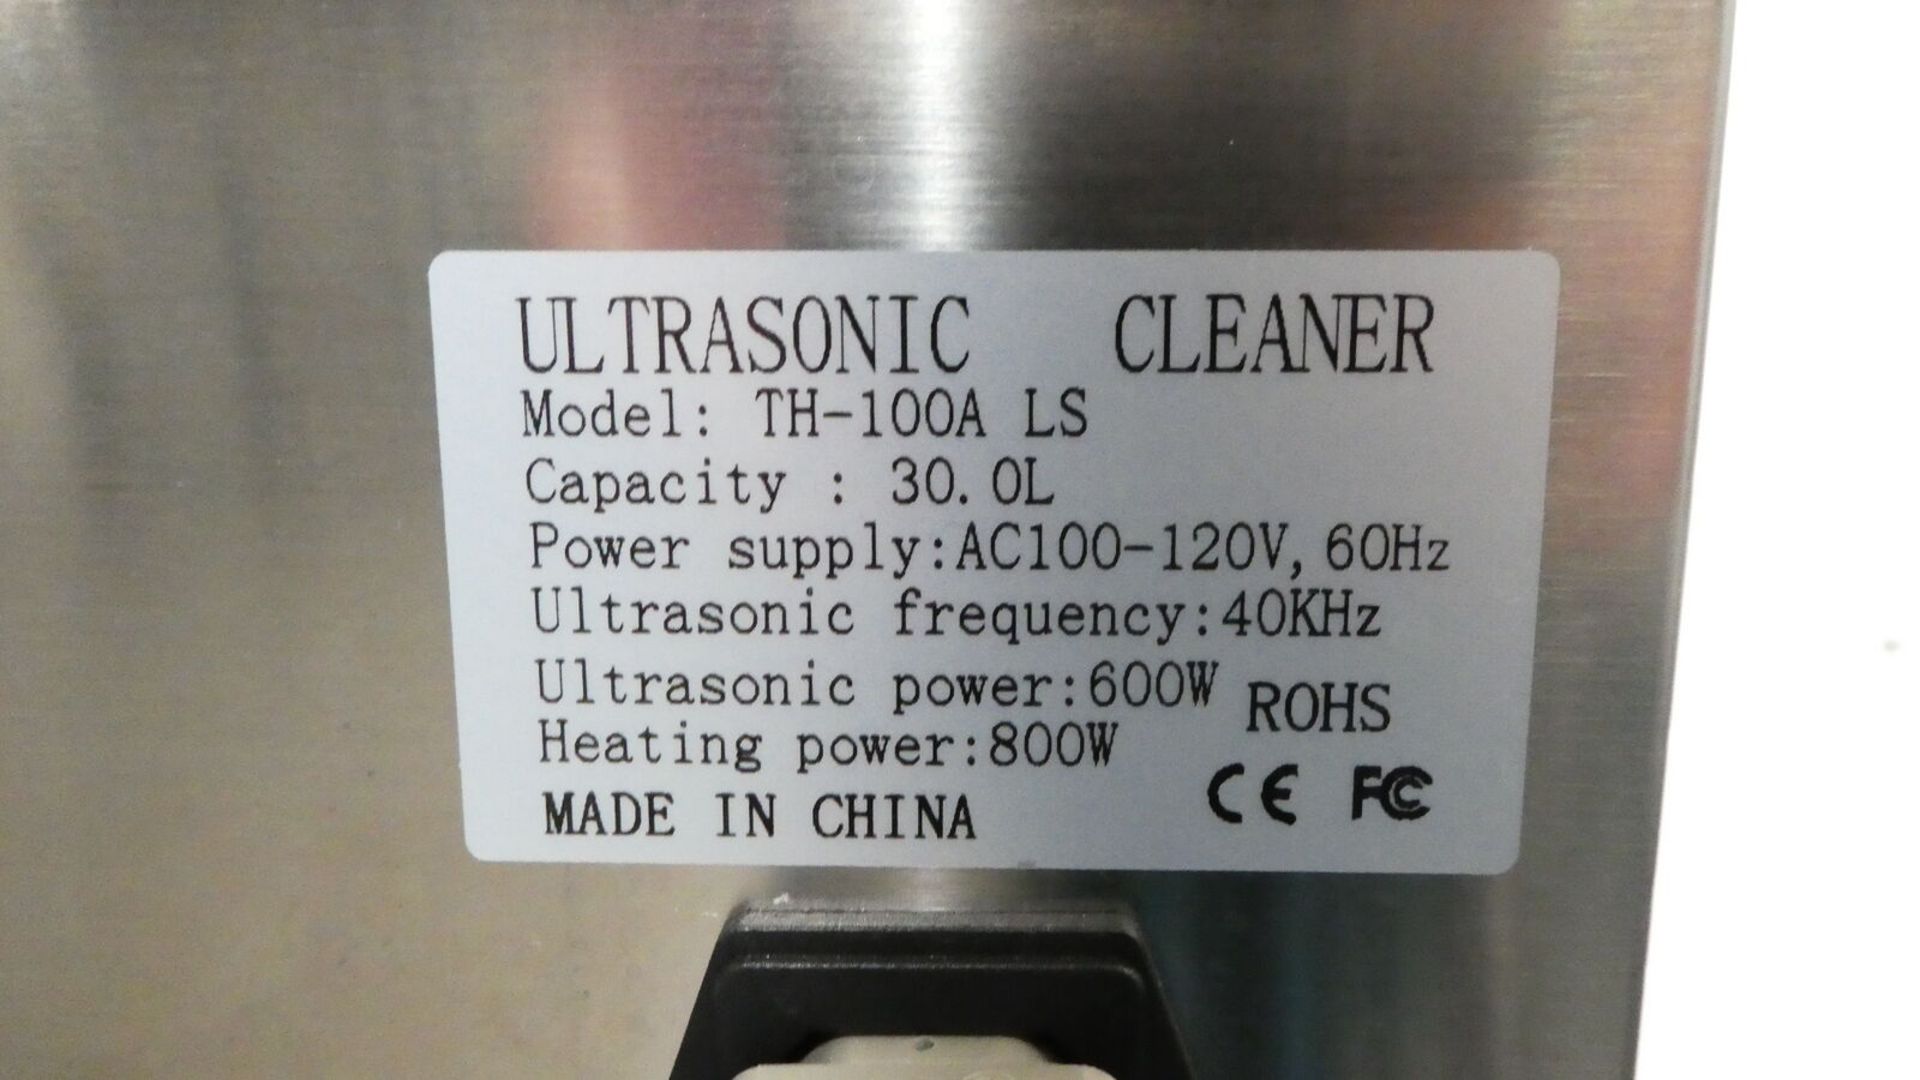 VEVOR Digital Ultrasonic Cleaner TH-100A LS Capacity 30.0L - Gilroy - Image 9 of 9